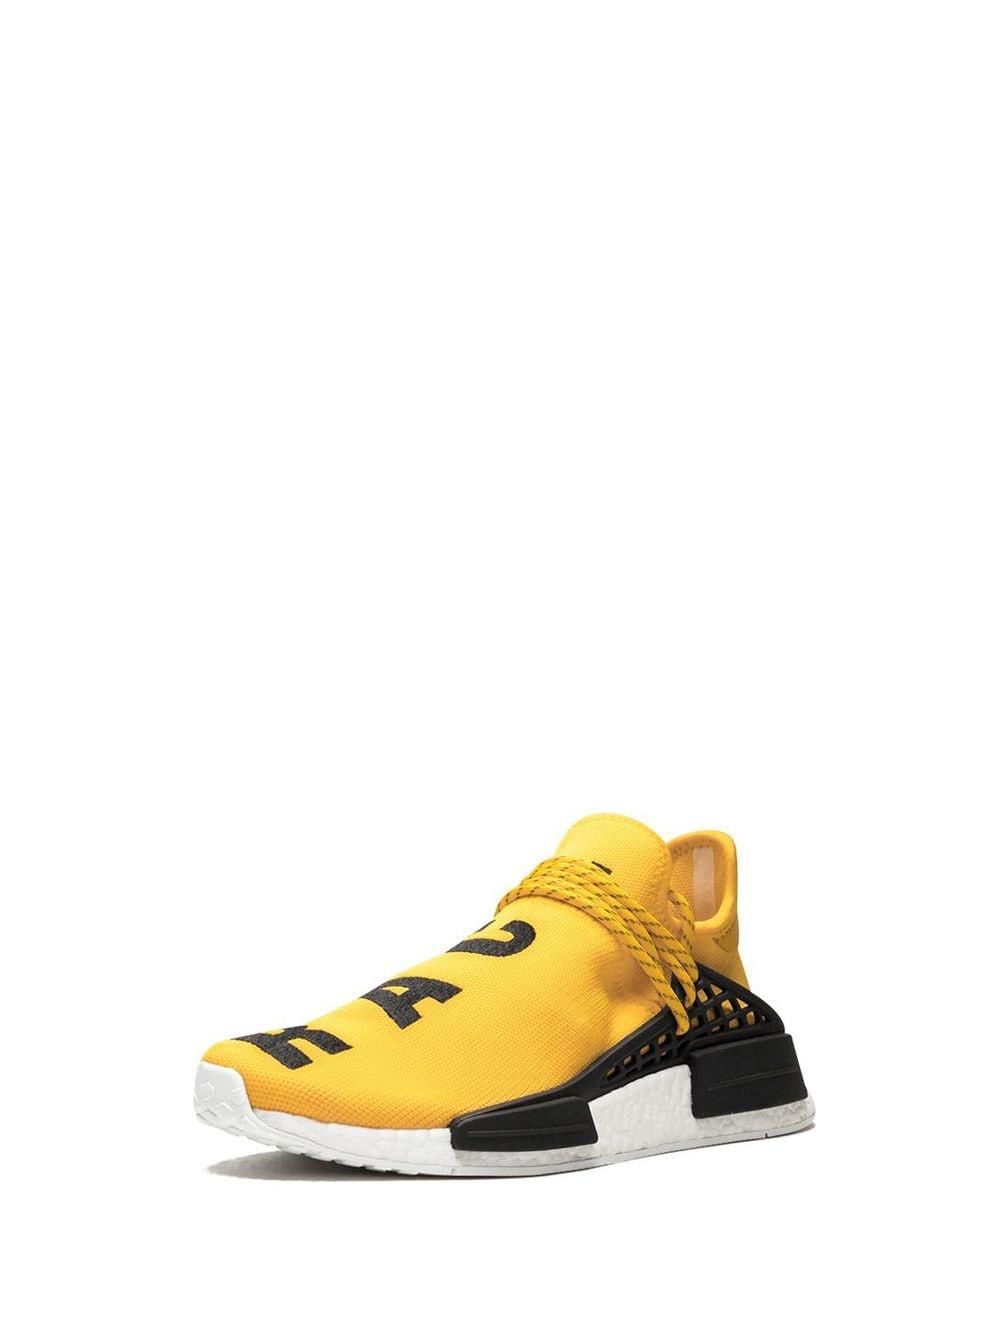 service trappe spray adidas Pw Human Race Nmd 'pharrell' Shoes in Yellow for Men - Lyst